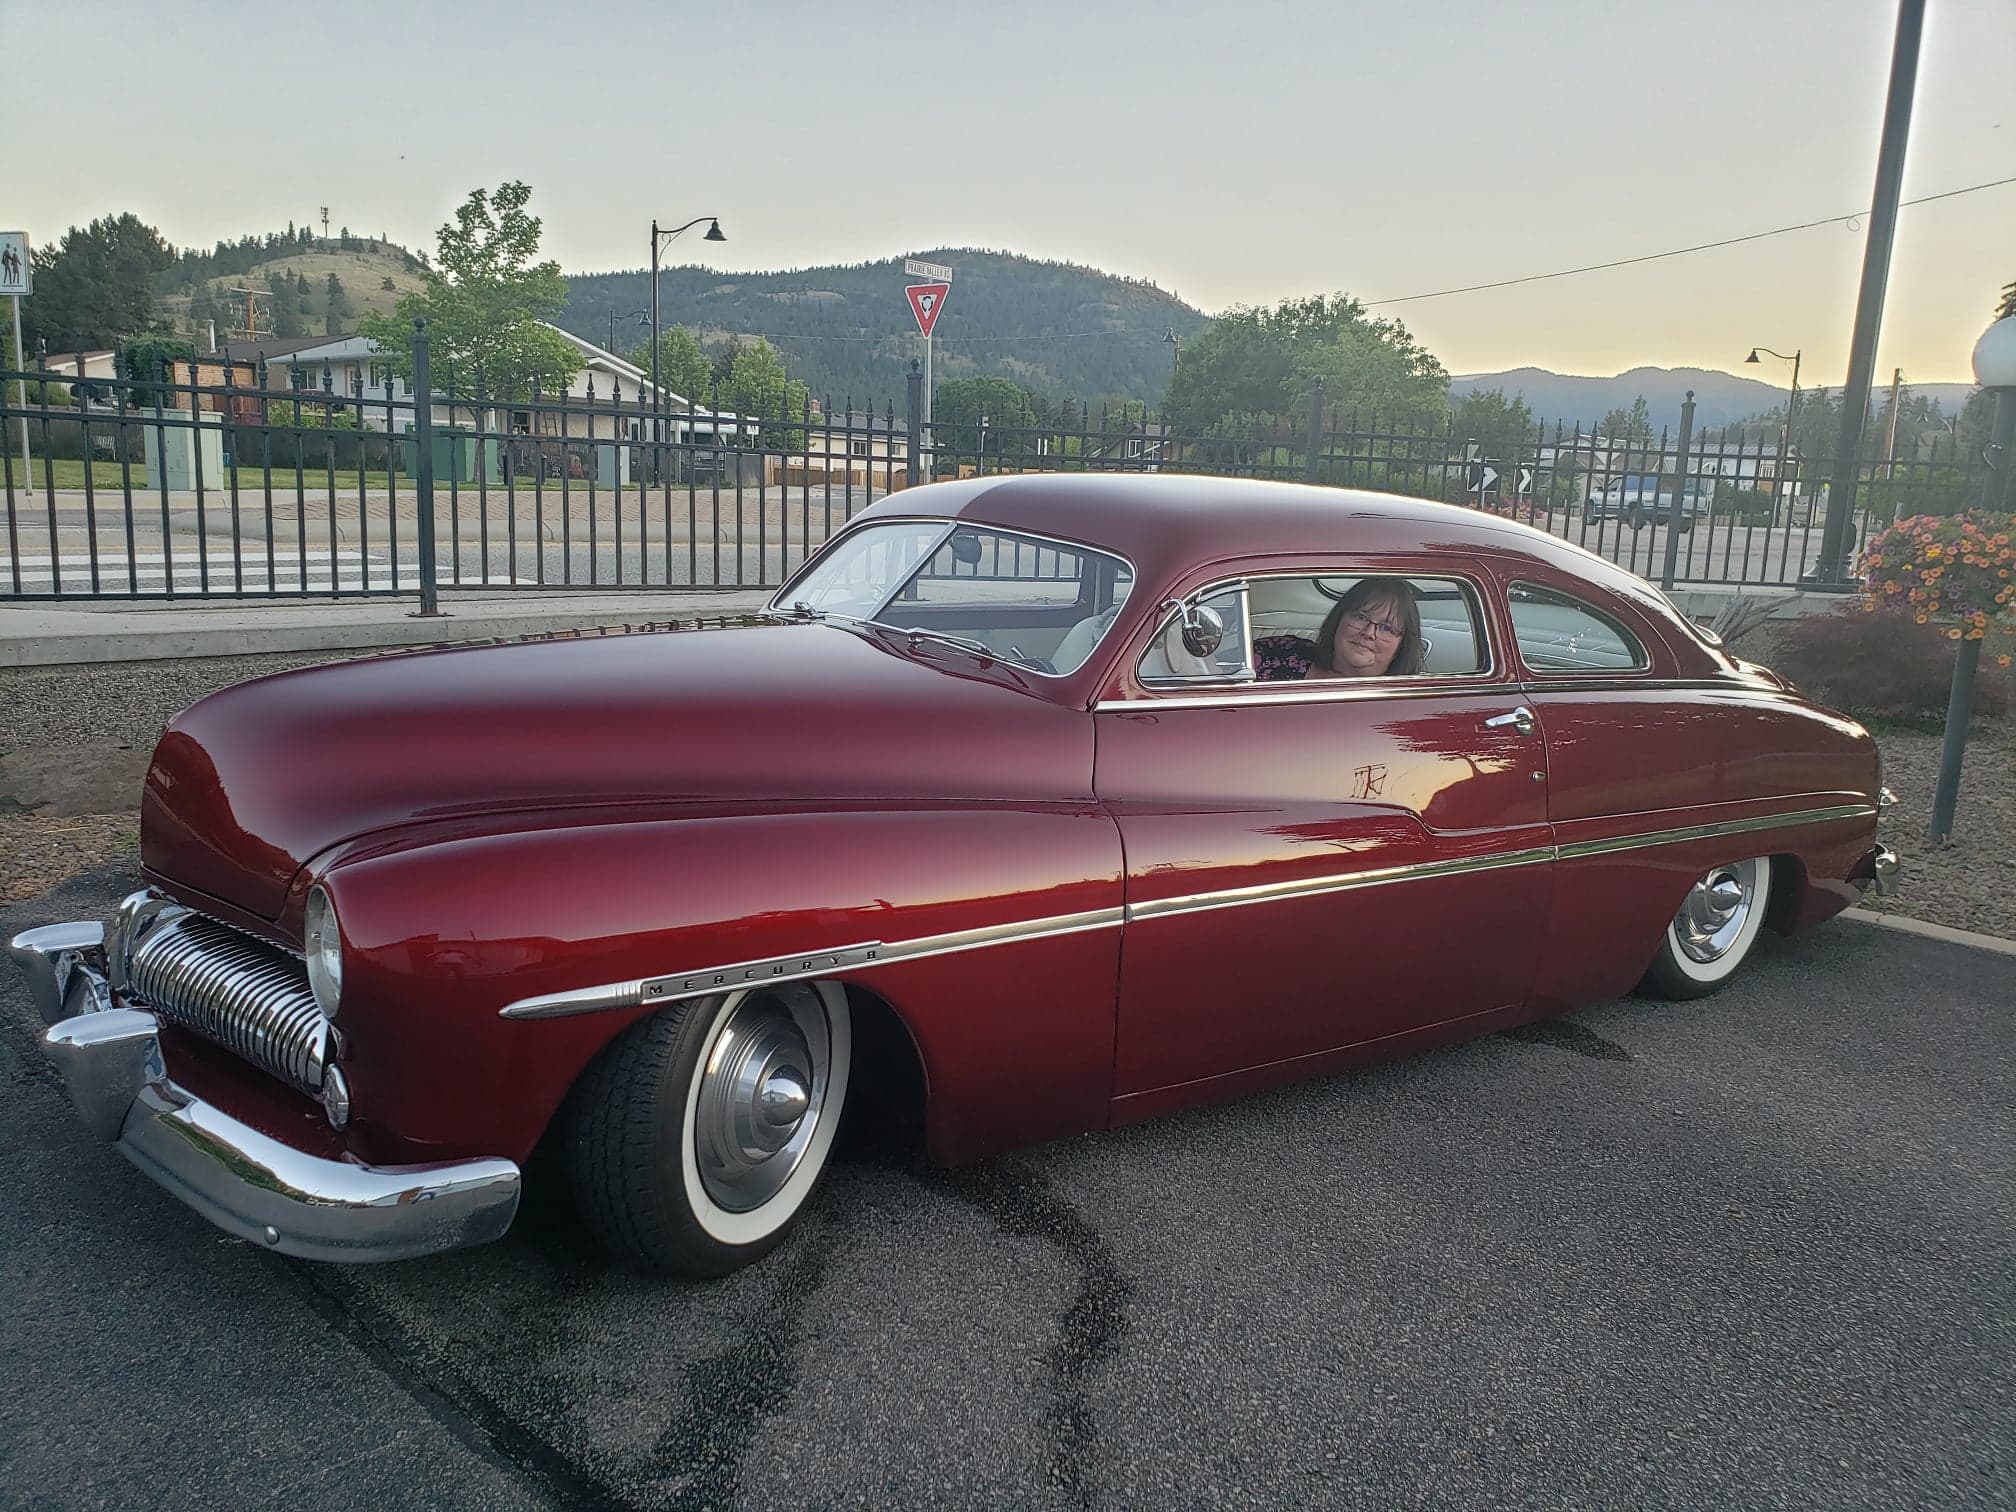 Woman inside burgundy 1949 Mercury hot rod with park and mountain in background.